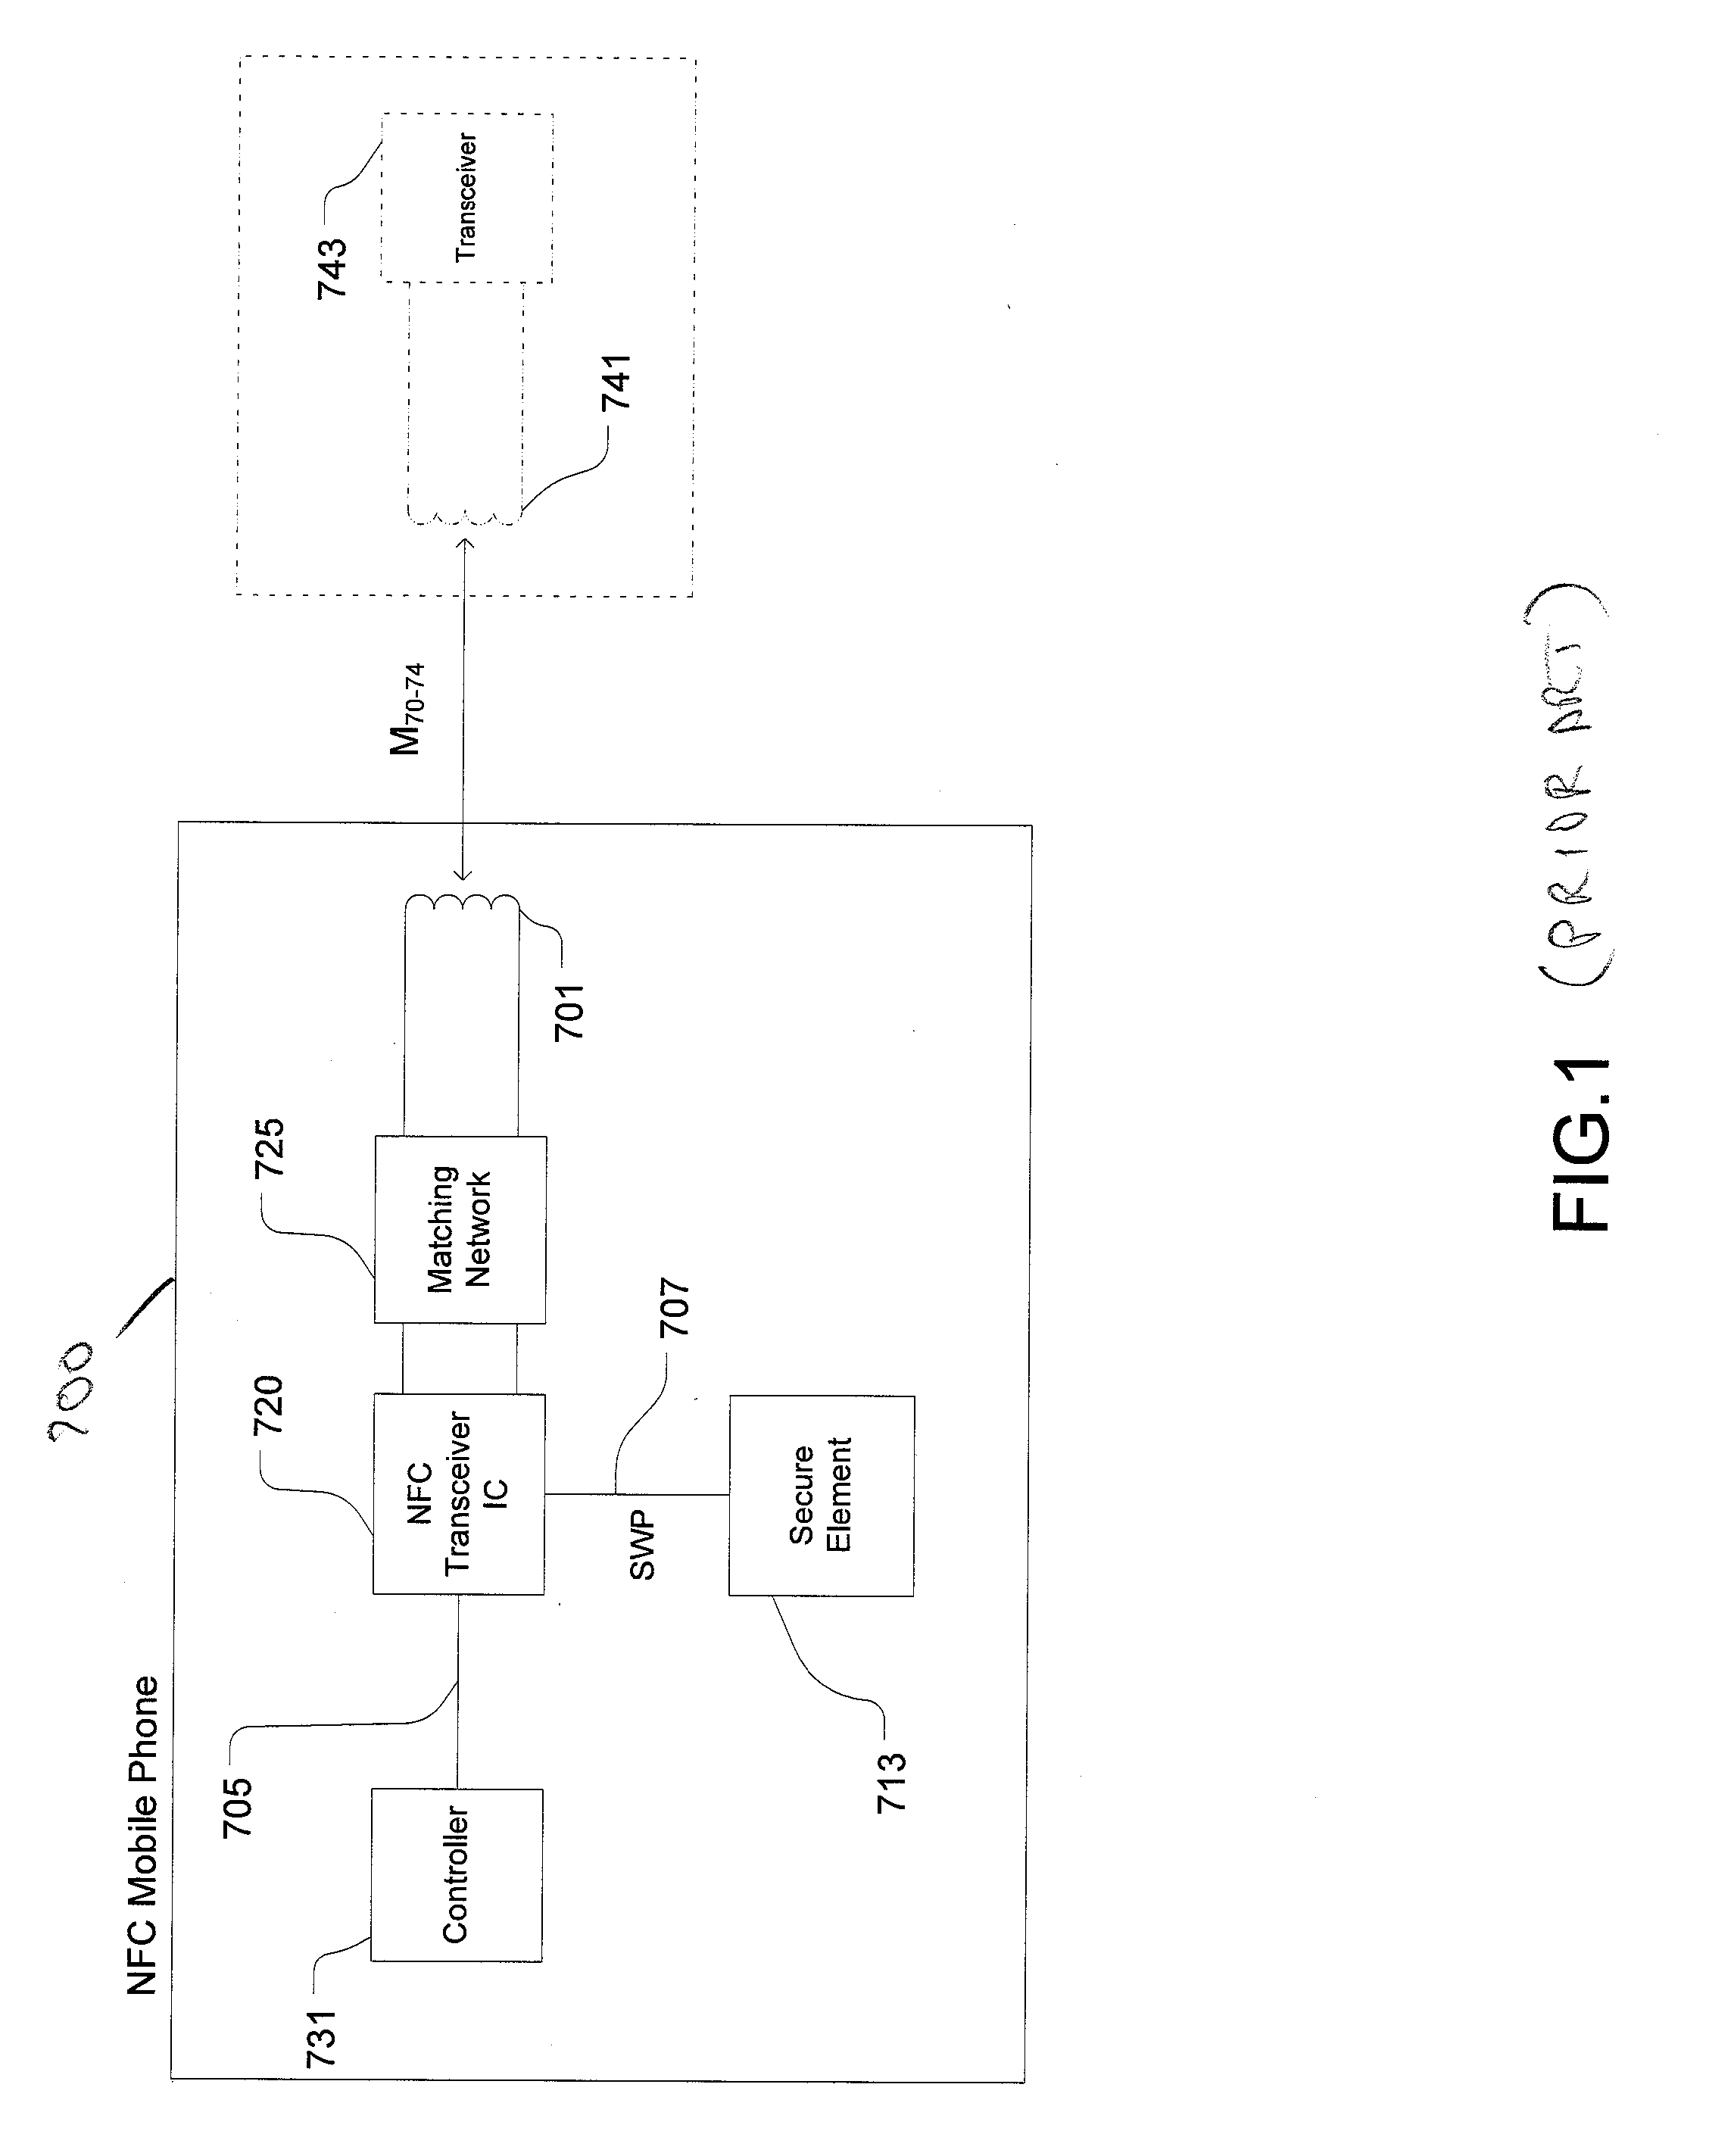 Multi-mode communication system for a mobile phone